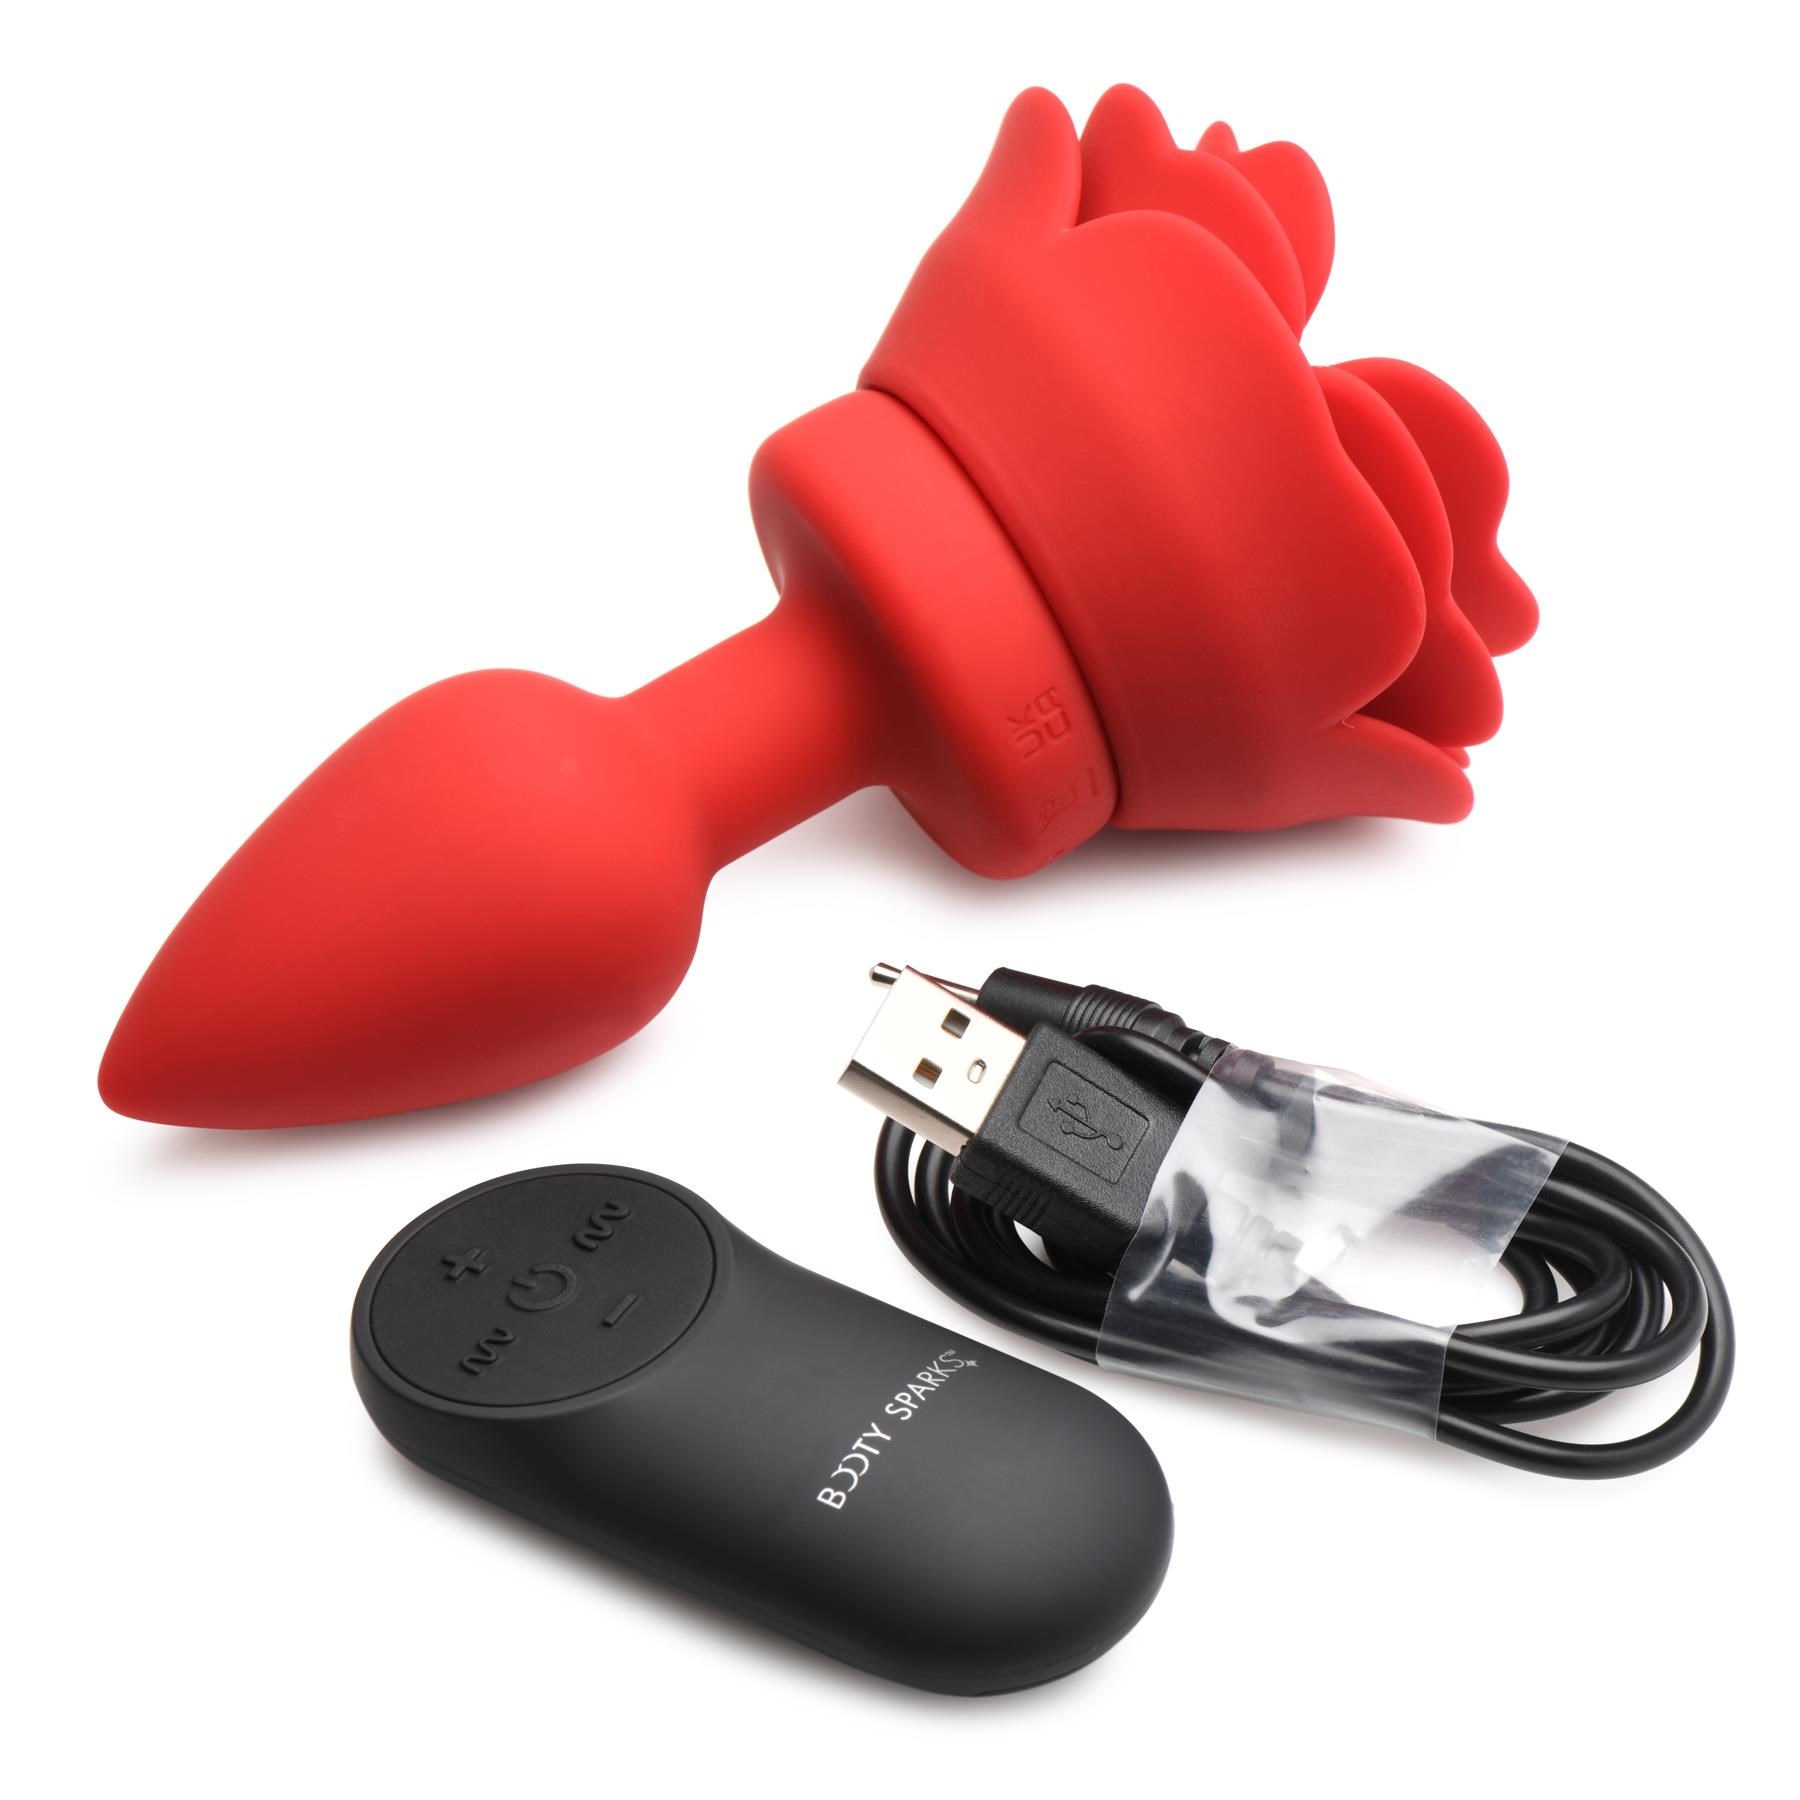 Booty Sparks Vibrating Rose Anal Plug with Remote Control - Product & Remote Showing Charging Cable